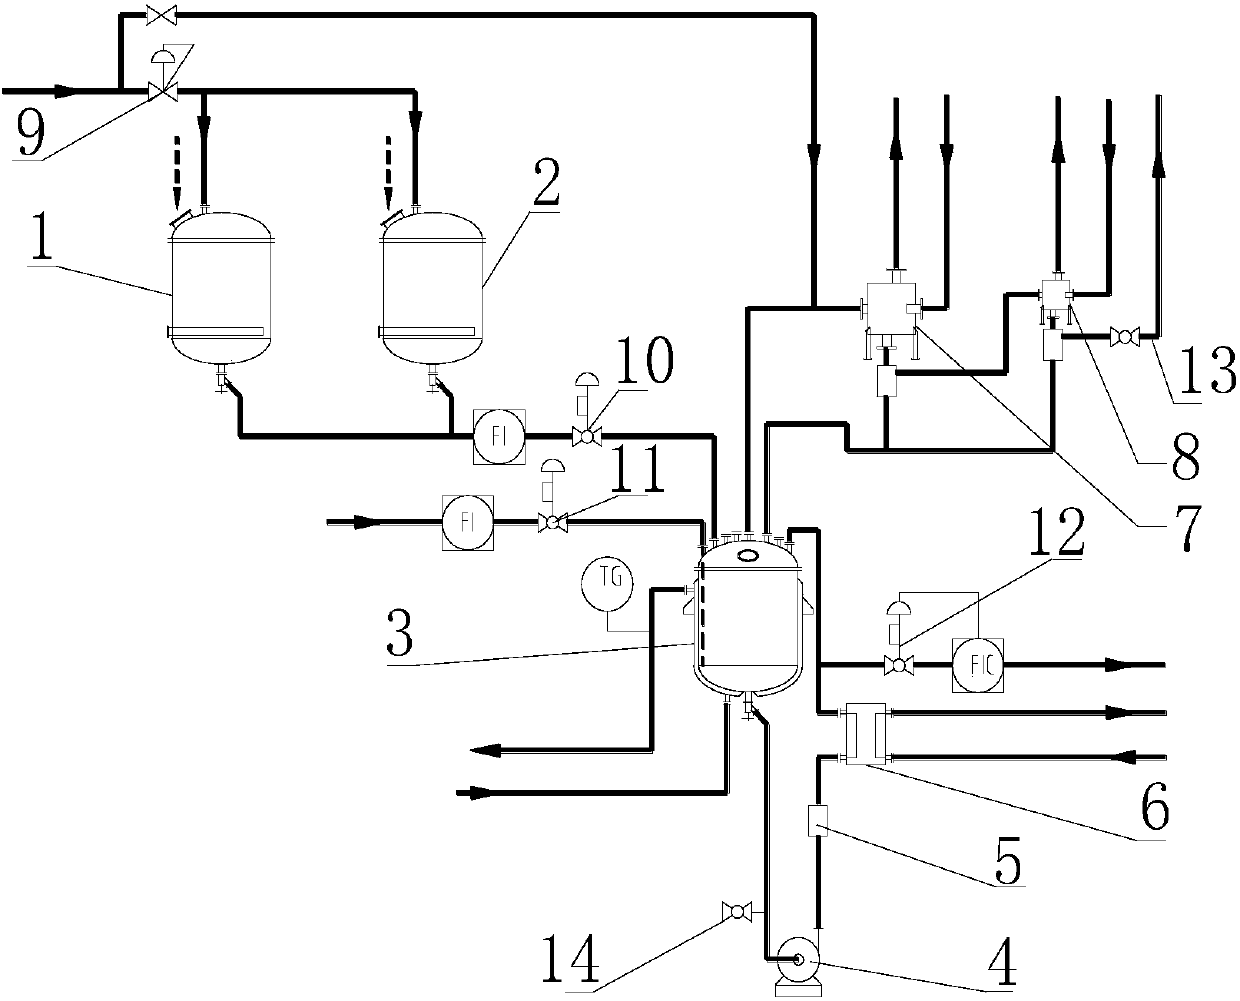 Continuous production process for sodium methoxide by using metal sodium method